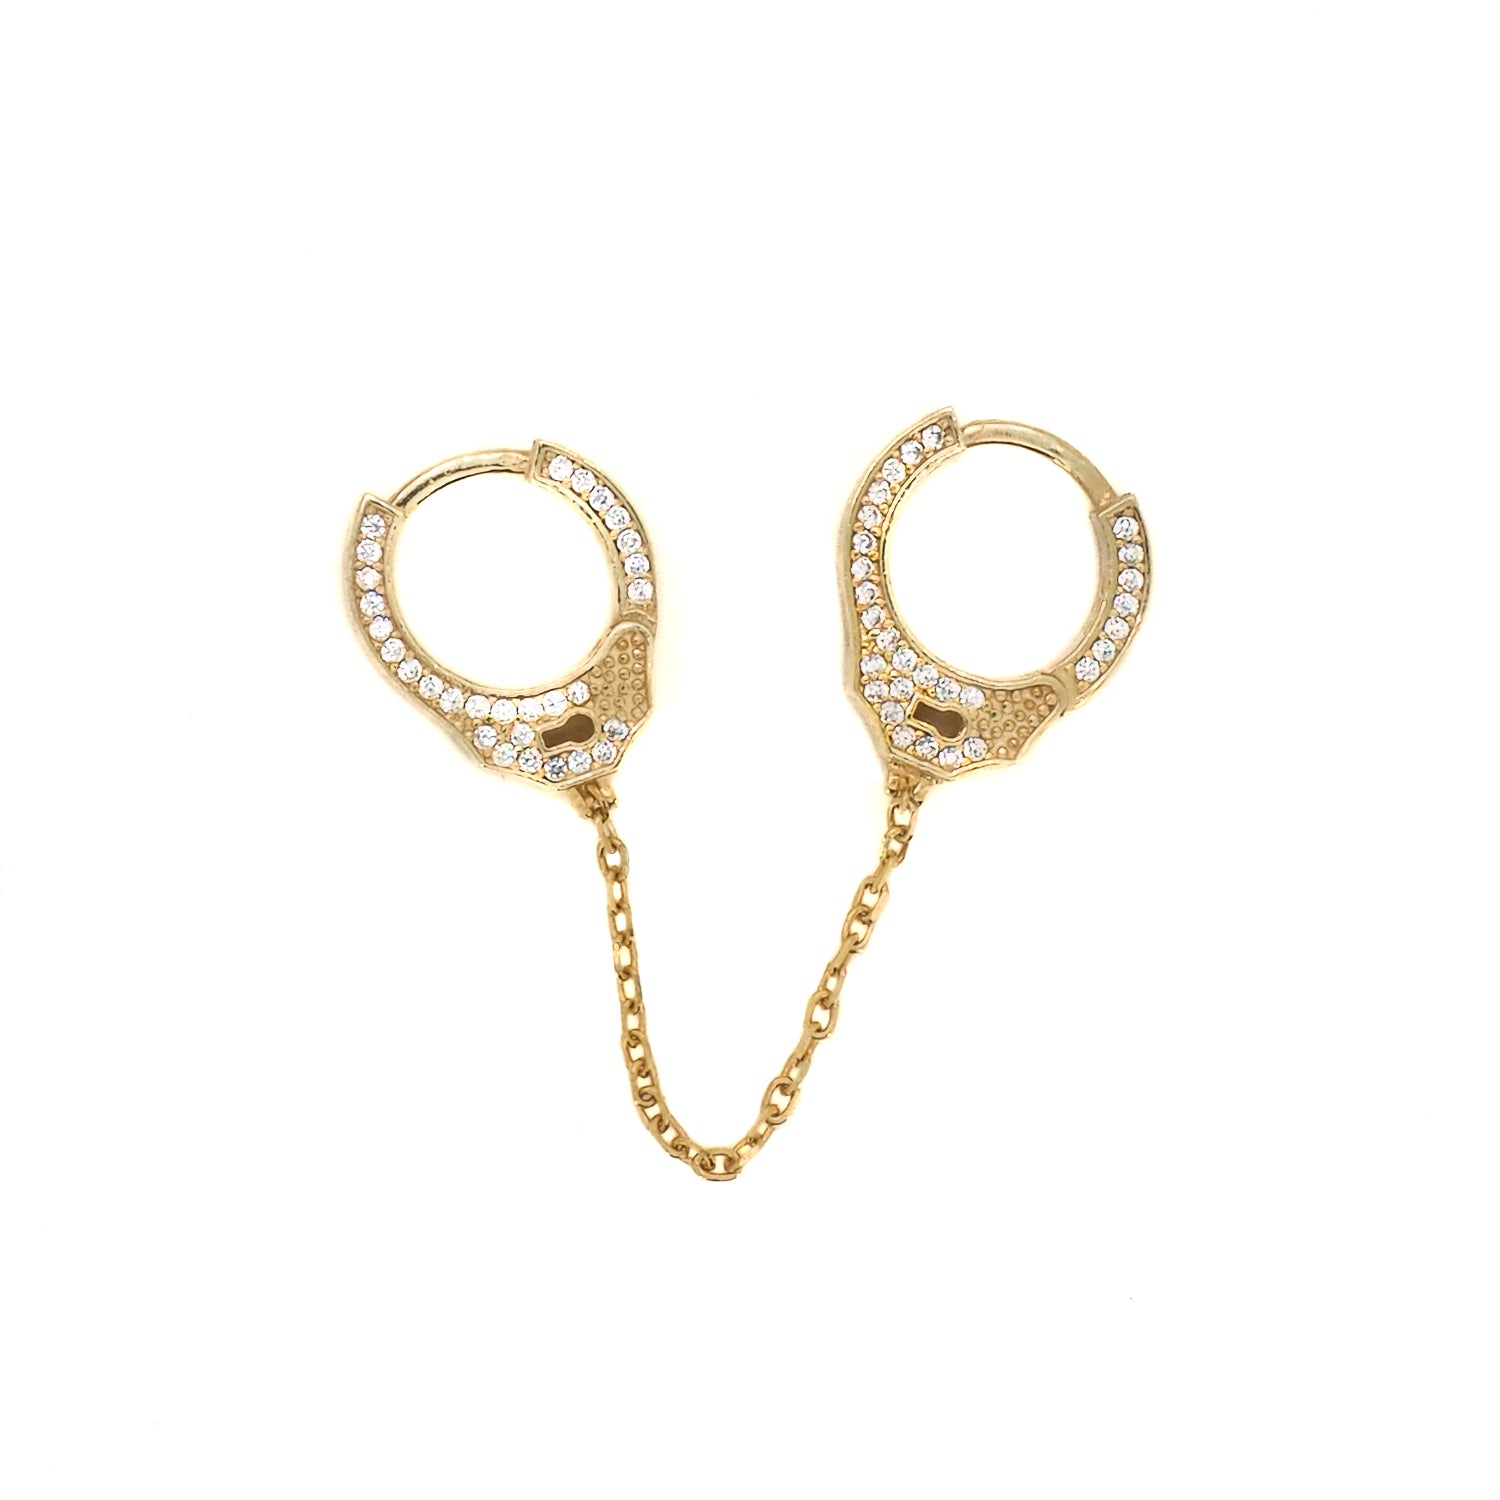 Commanding Attention: Gold &amp; Diamond Handcuff Earrings